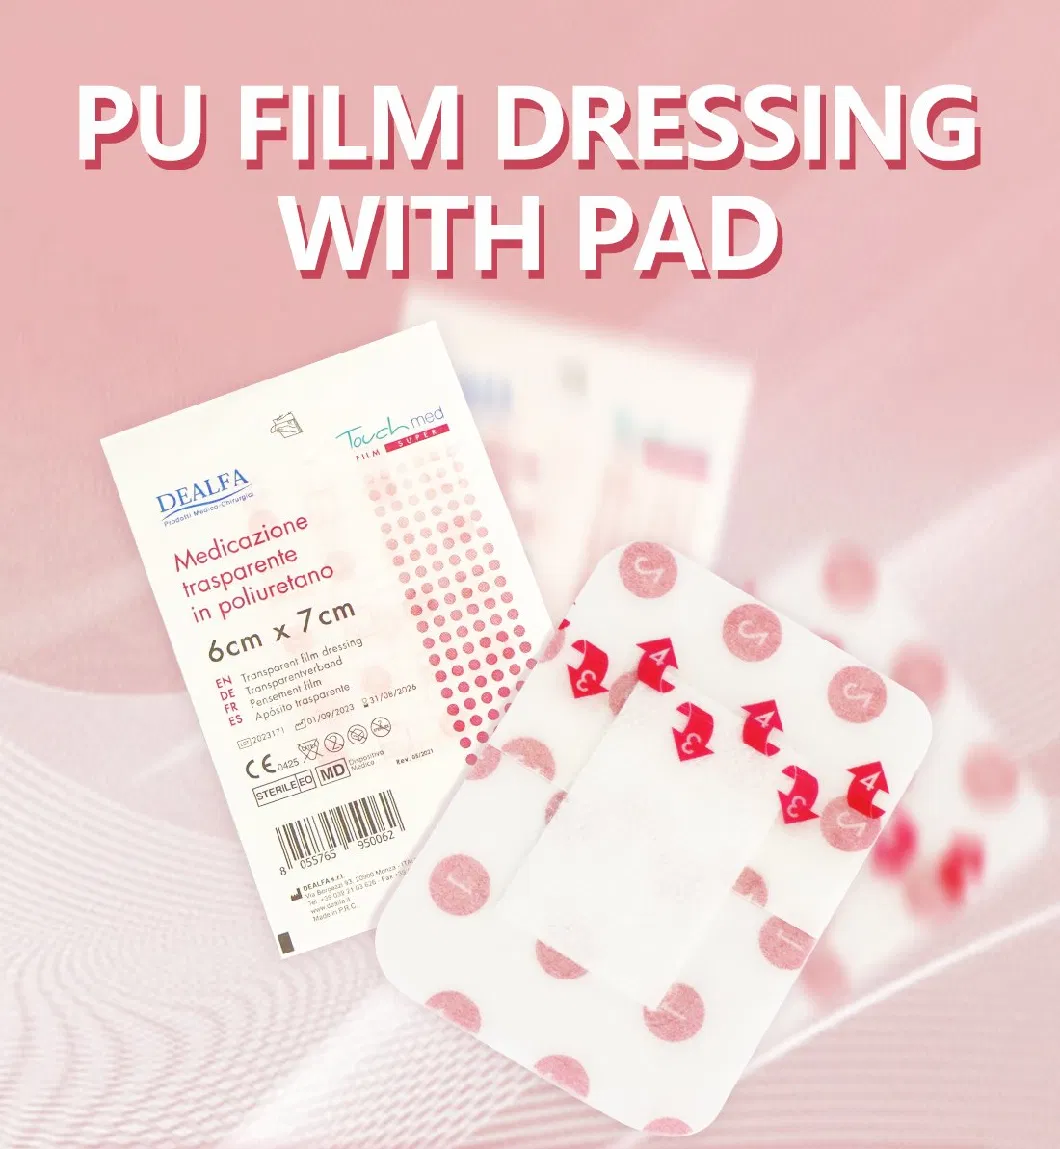 Bluenjoy Medical Supply Waterproof Wound Dressing Adhesive Transparent PU Film Dressing with Pad